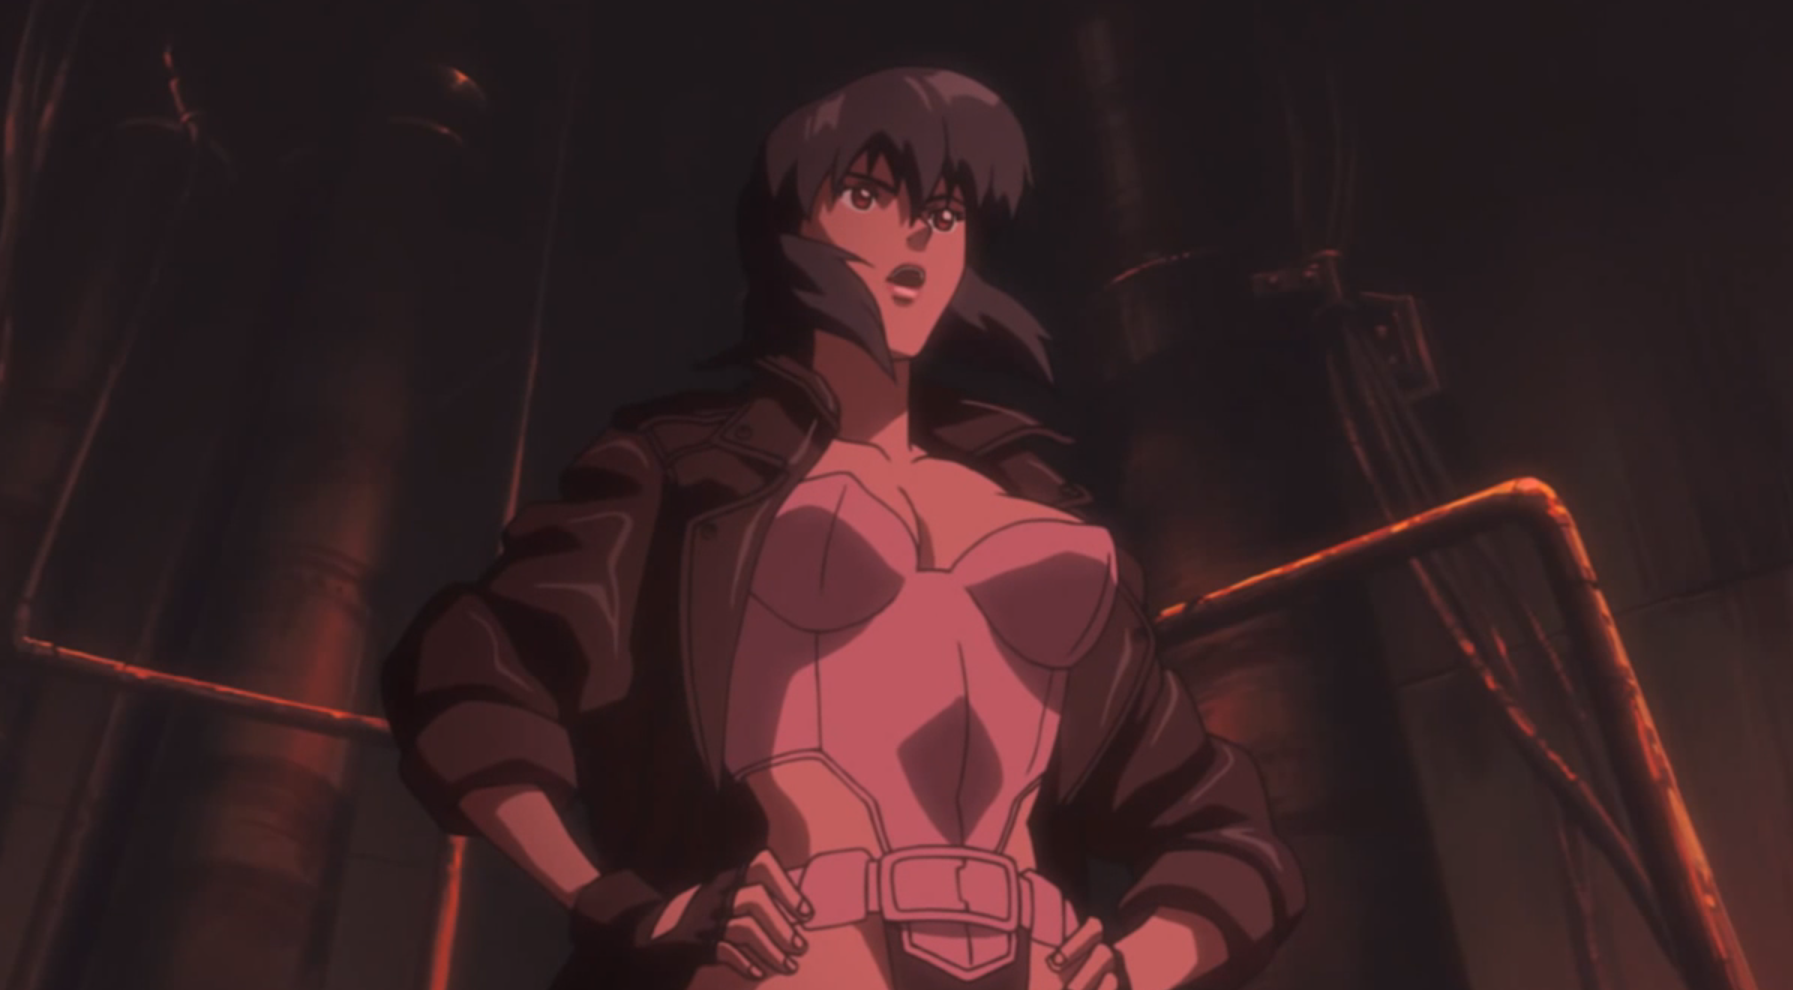 The Major, Motoko Kusanagi, Ghost in the Shell: Stand Alone Complex, episode 25, Production IG, 2002